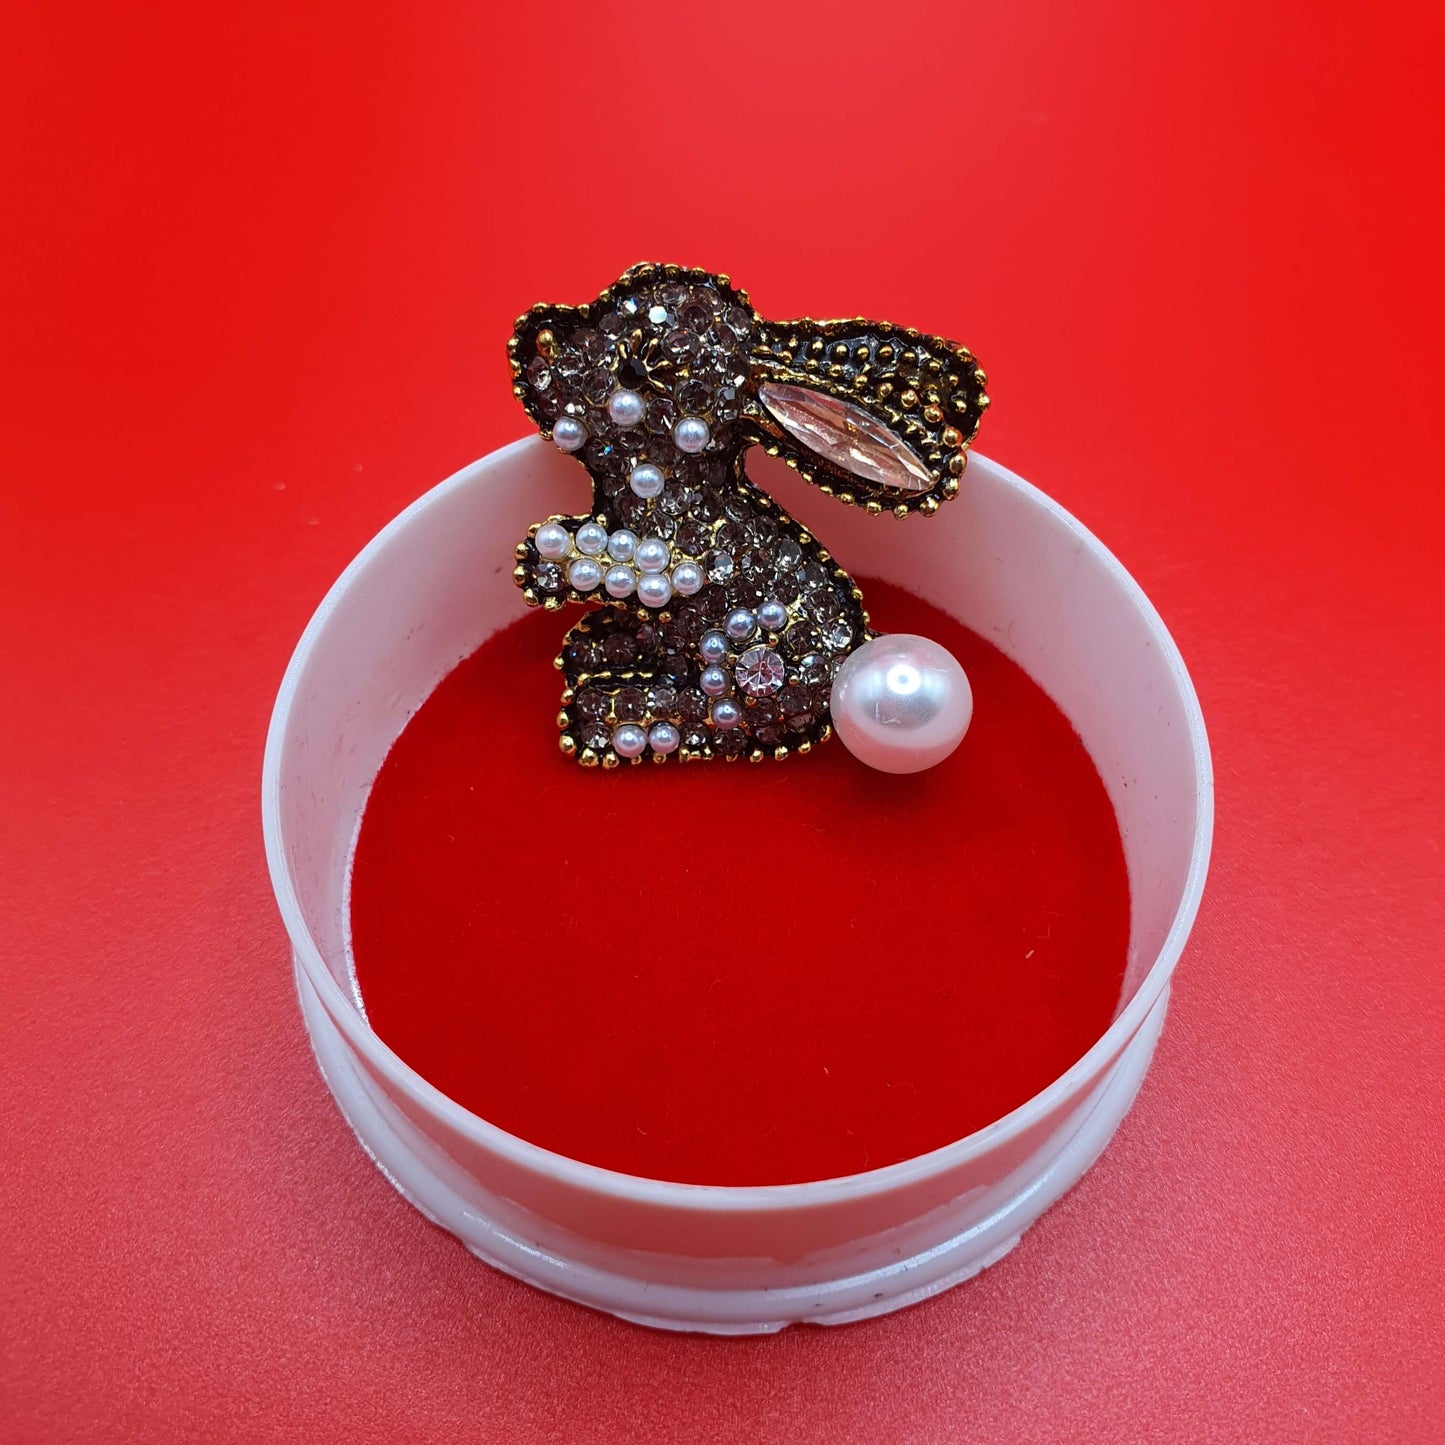 'Baby Bunny Twins' brooches